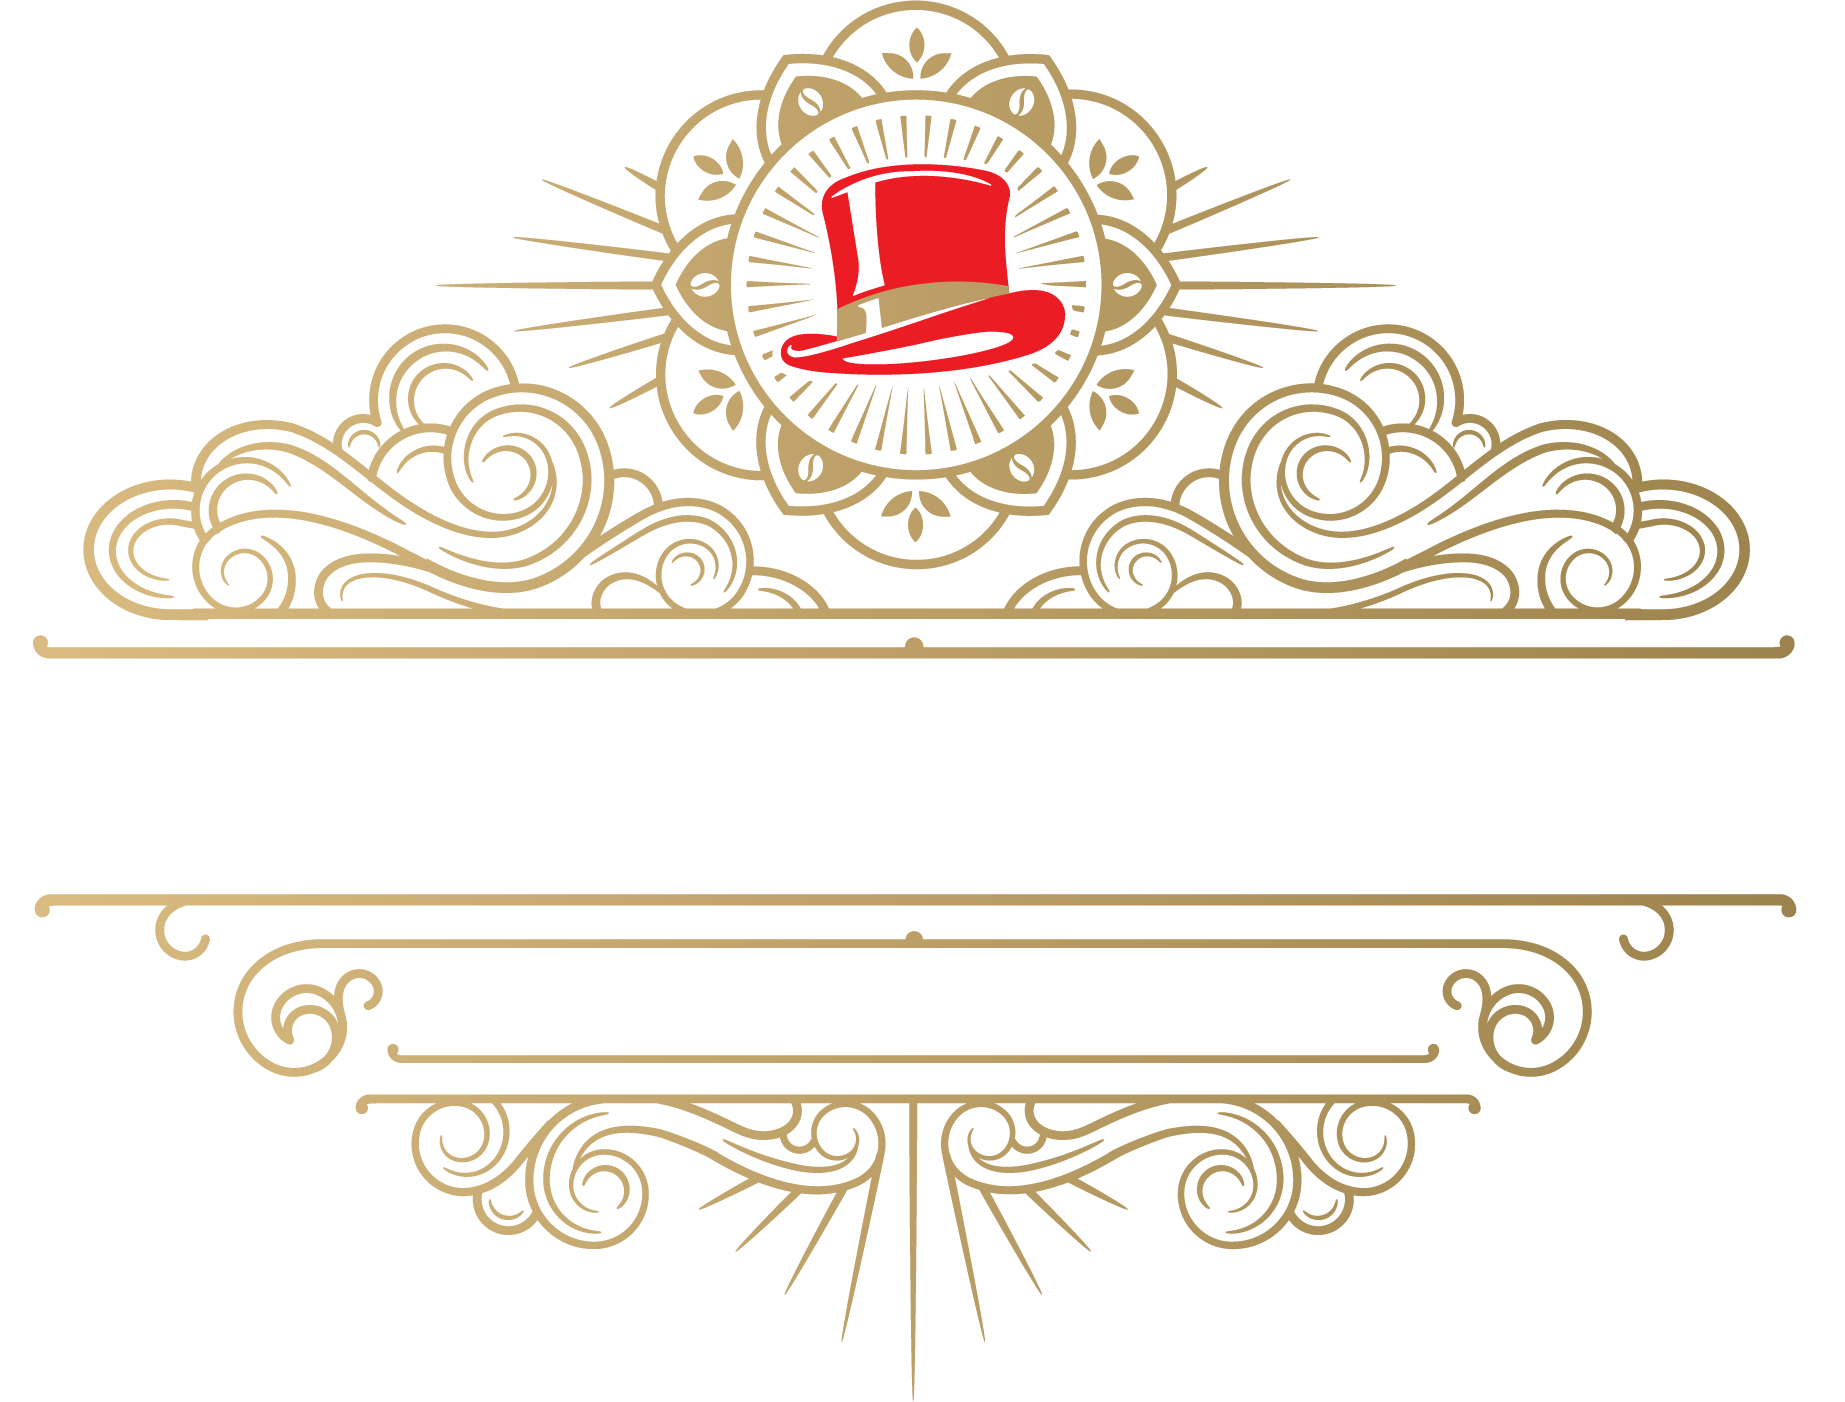 Cloud Parlor Speakeasy Cafe is our company name. Pictured is our logo. Our logo consists of a red top hat, the words Cloud Parlor, a subtitle for Speakeasy Cafe and a gold cloudy pillory around the words.